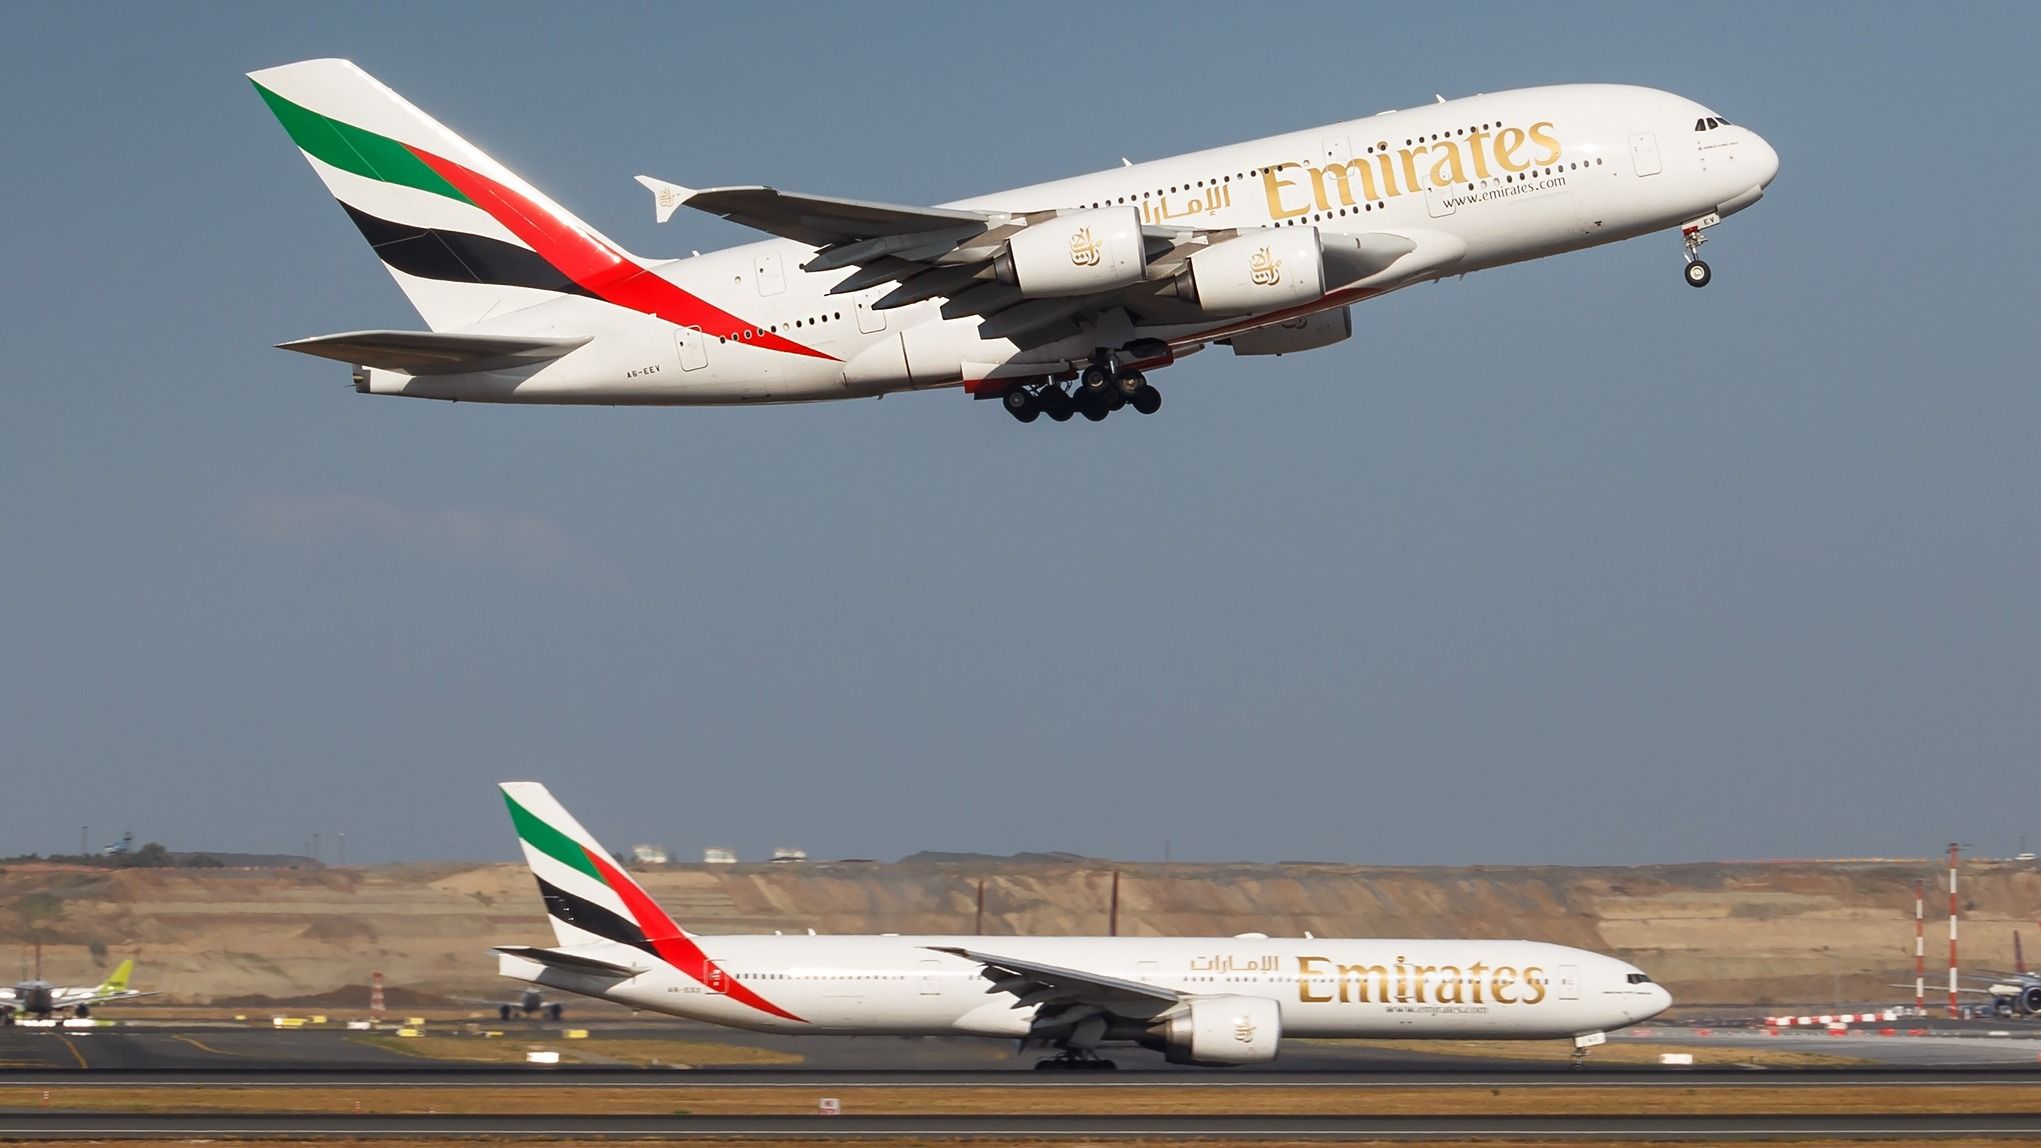 An Emirates Airbus A380 taking off as an Emirates Boeing 777 taxis.